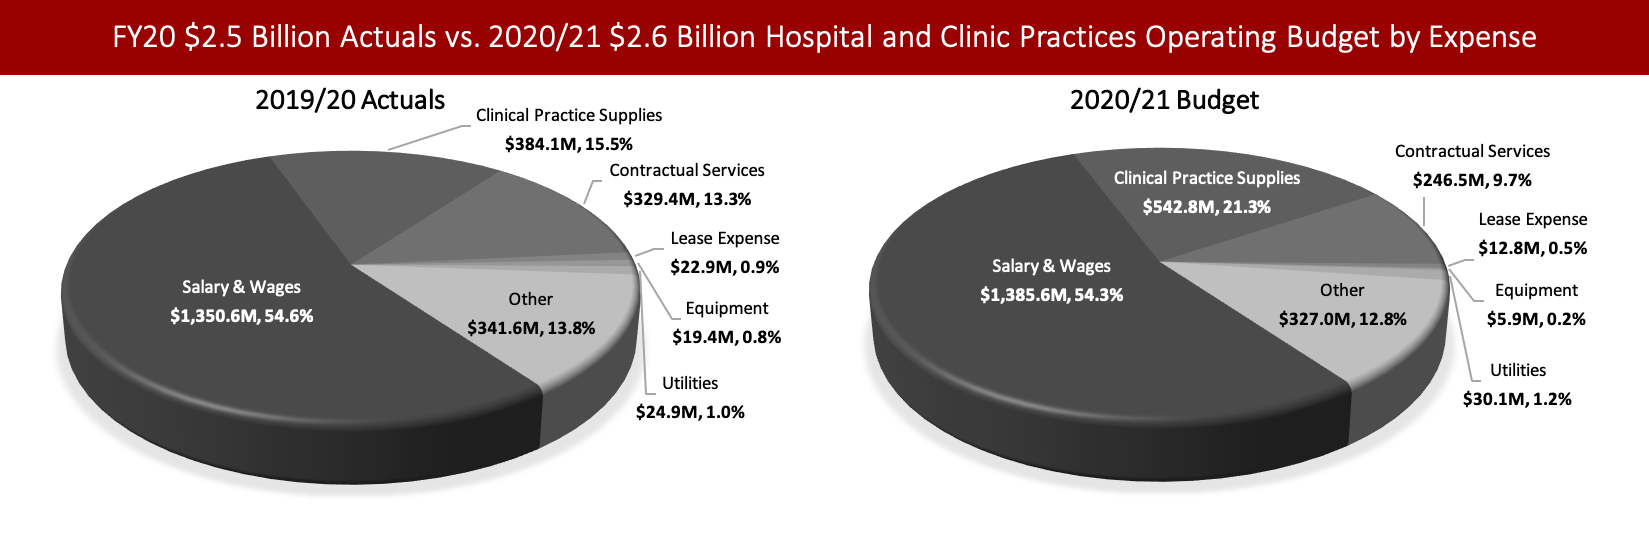 Left Chart: Pie chart showing Stony Brook's 2019/20 $2.5 Billion Hospital and Clinical Practices Actual Operating Expense by Expense Type  Salary & Wages: $1,350.6M Clinical Practice Supplies: $384.1M Contractual Services: $329.4M Lease Expense: $22.9M Equipment: $19.4M Utilities: $24.9M Other: $341.6M. Right Chart: Pie chart showing Stony Brook's 2020/21 $2.6 Billion Hospital and Clinical Practices Operating Budget by Expense Type  Salary & Wages: $1,385.6M Clinical Practice Supplies: $542.8M Contractual Services: $246.5M Lease Expense: $12.8M Equipment: $5.9M Utilities: $30.1M Other: $327.0M.